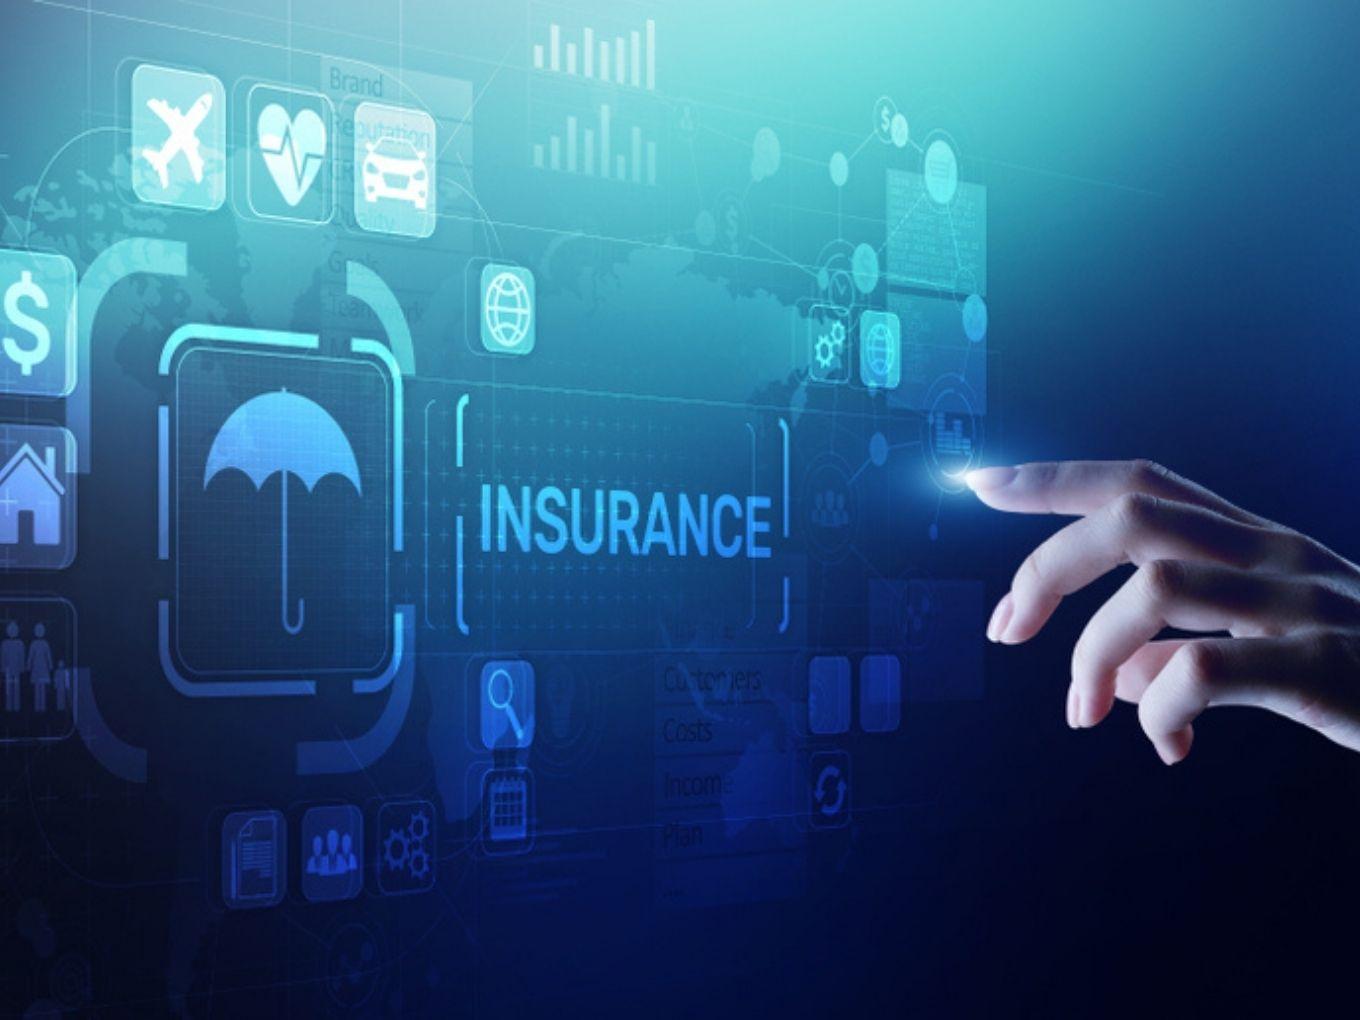 Digit Insurance Becomes First Unicorn Of 2021 With $18 Mn Fundraise